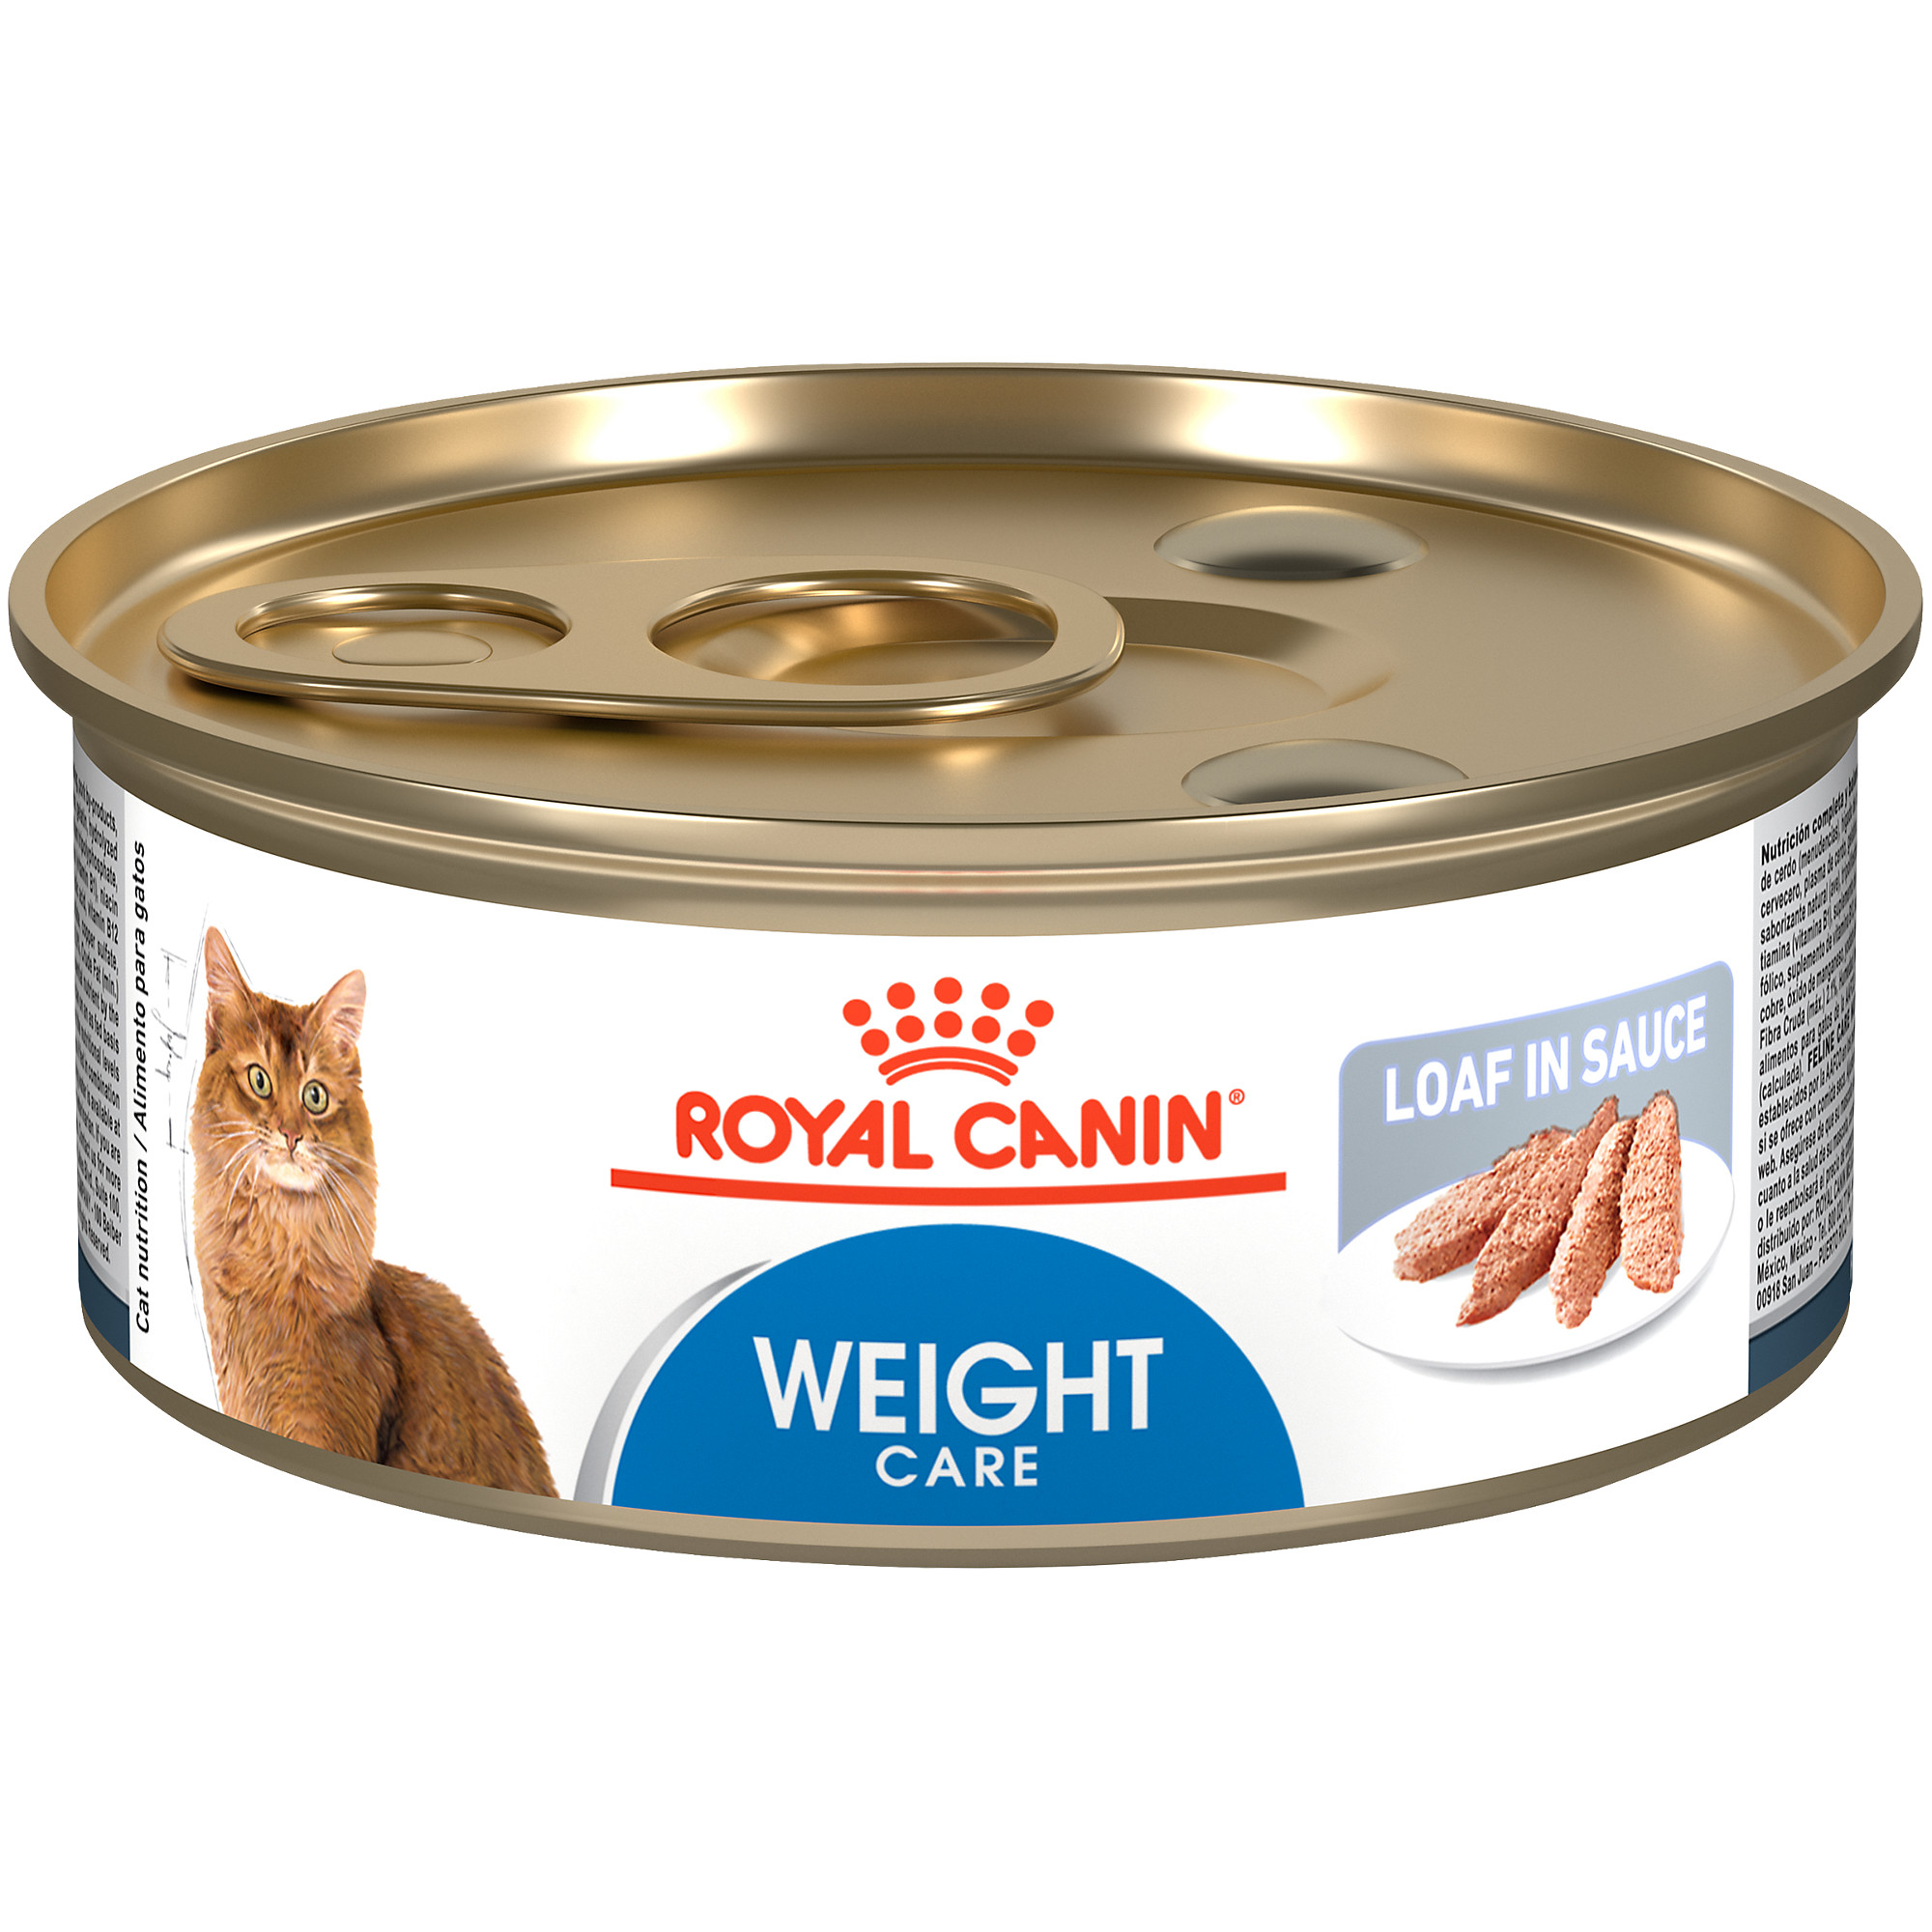 Weight Care Loaf in Sauce Canned Cat Food Royal Canin